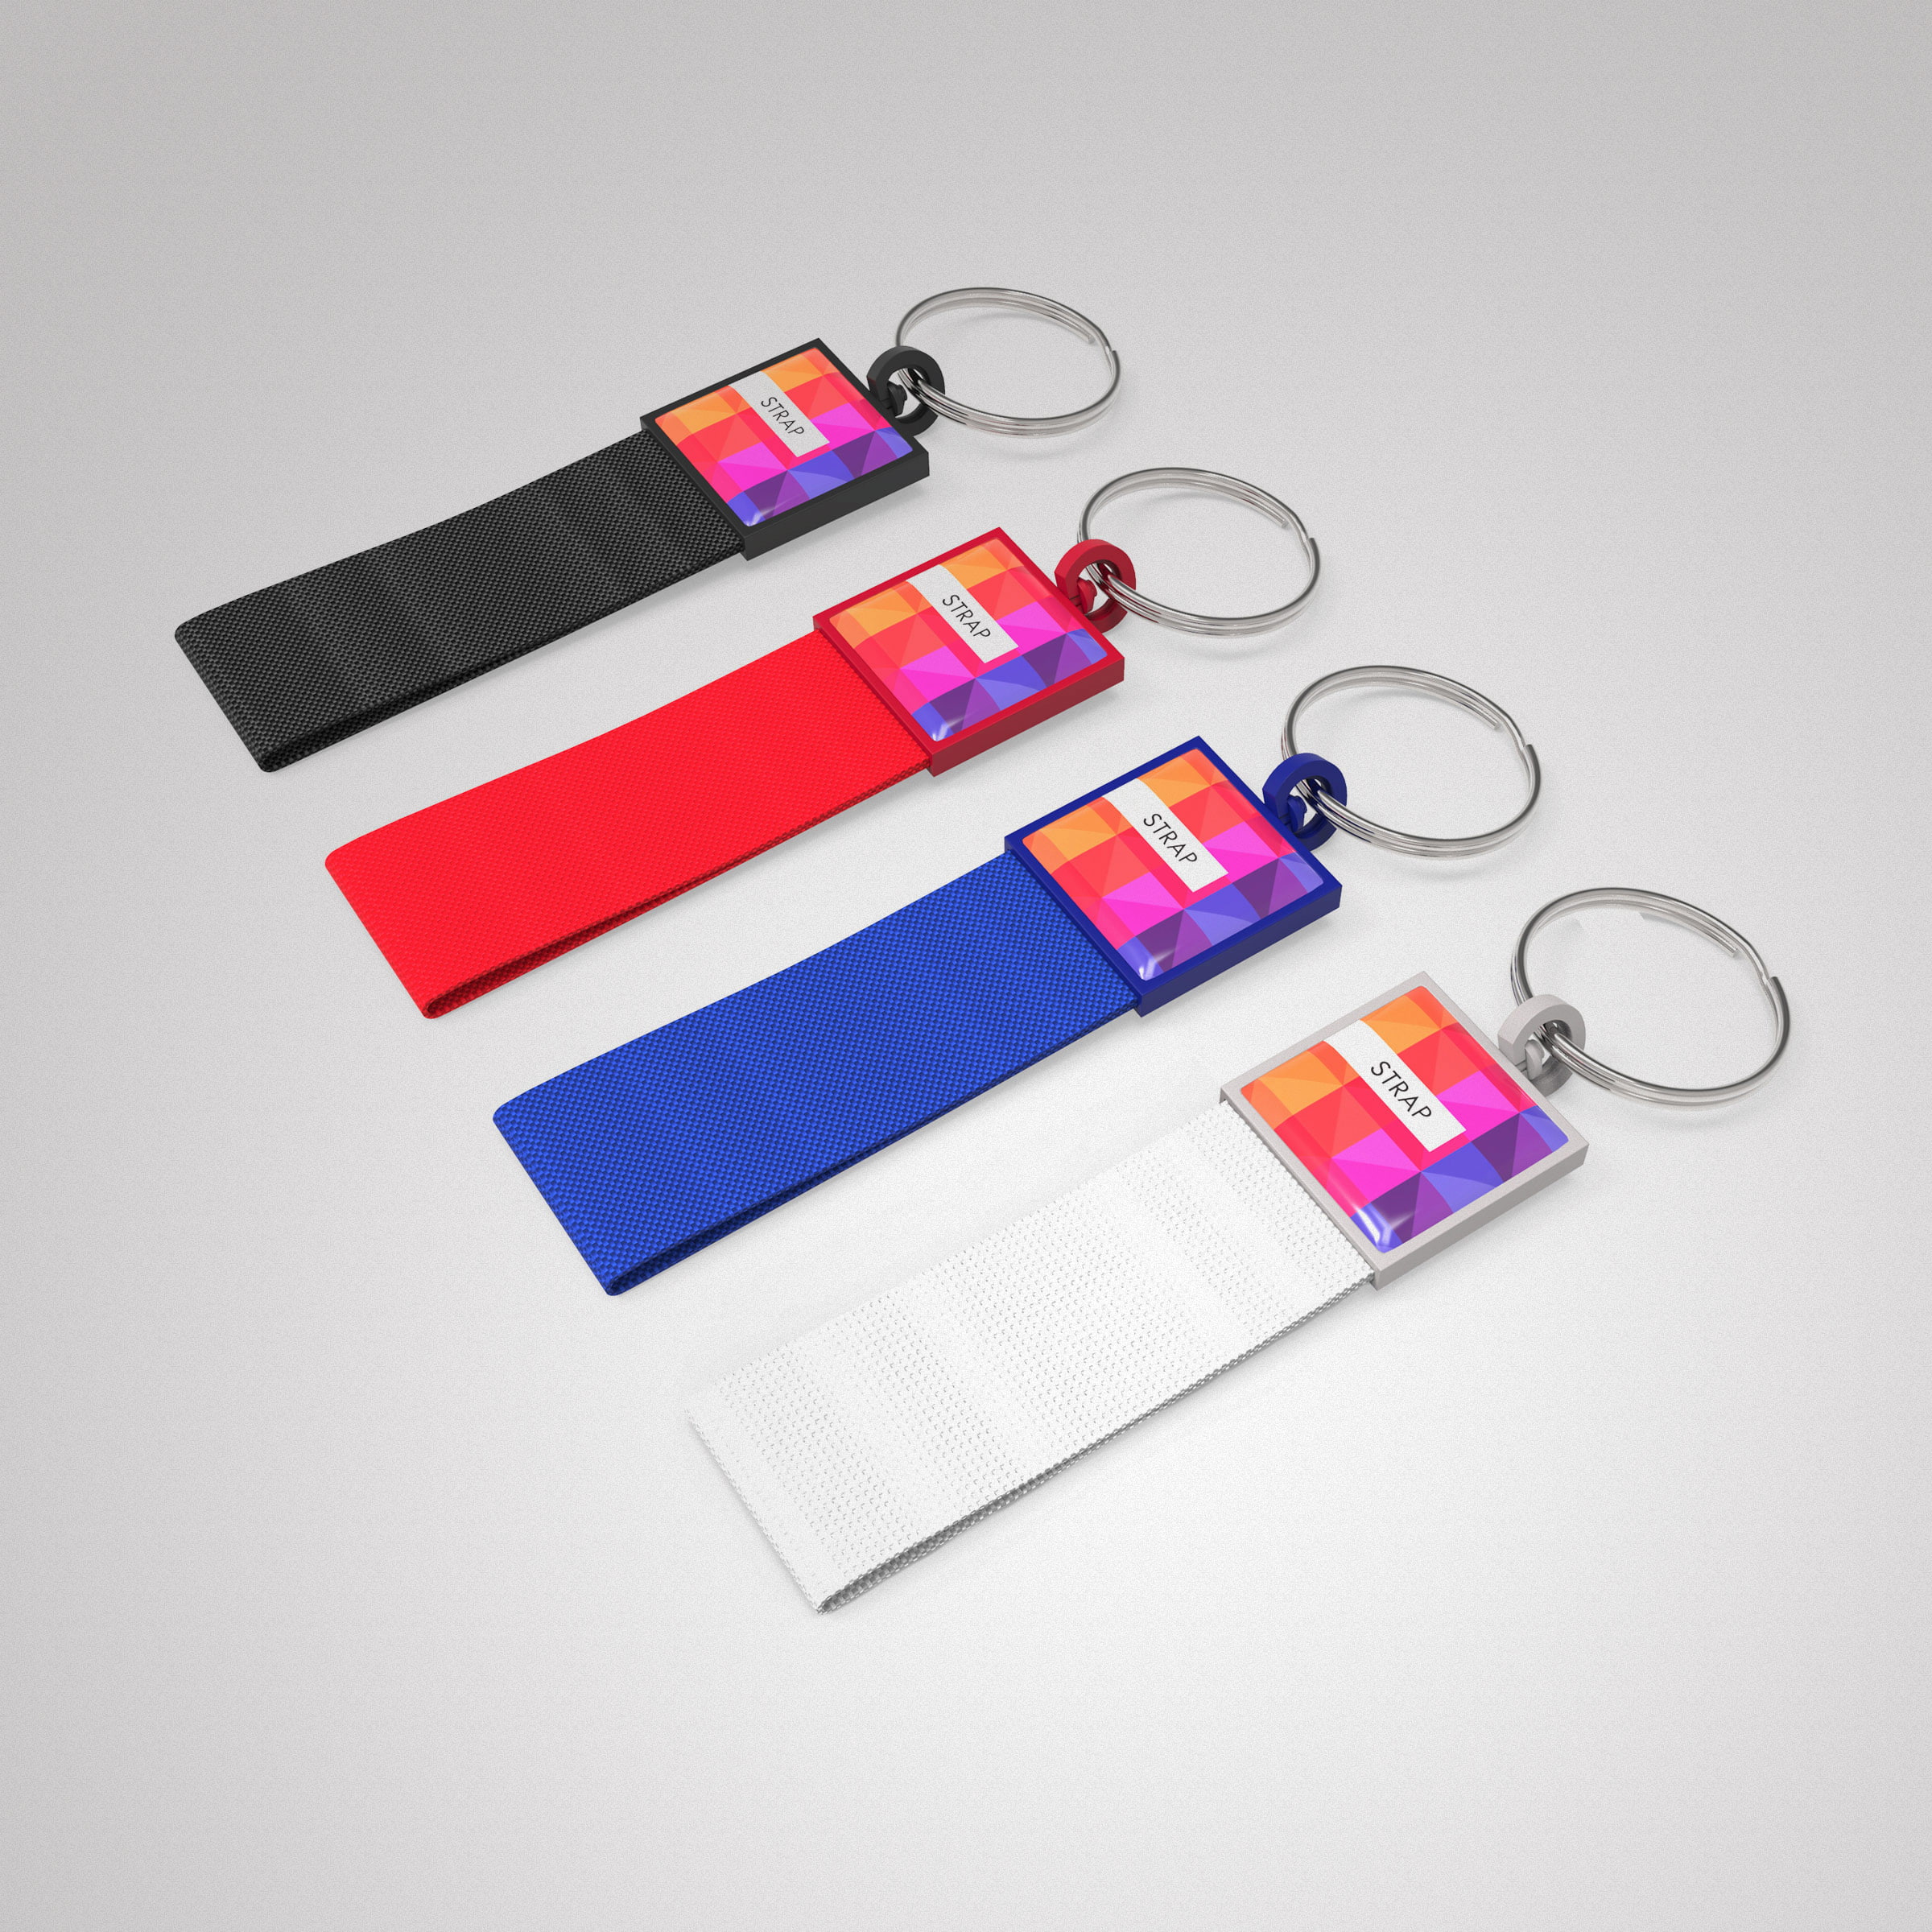 Key Ring Strap - Handy Key Ring Strap made in four colors